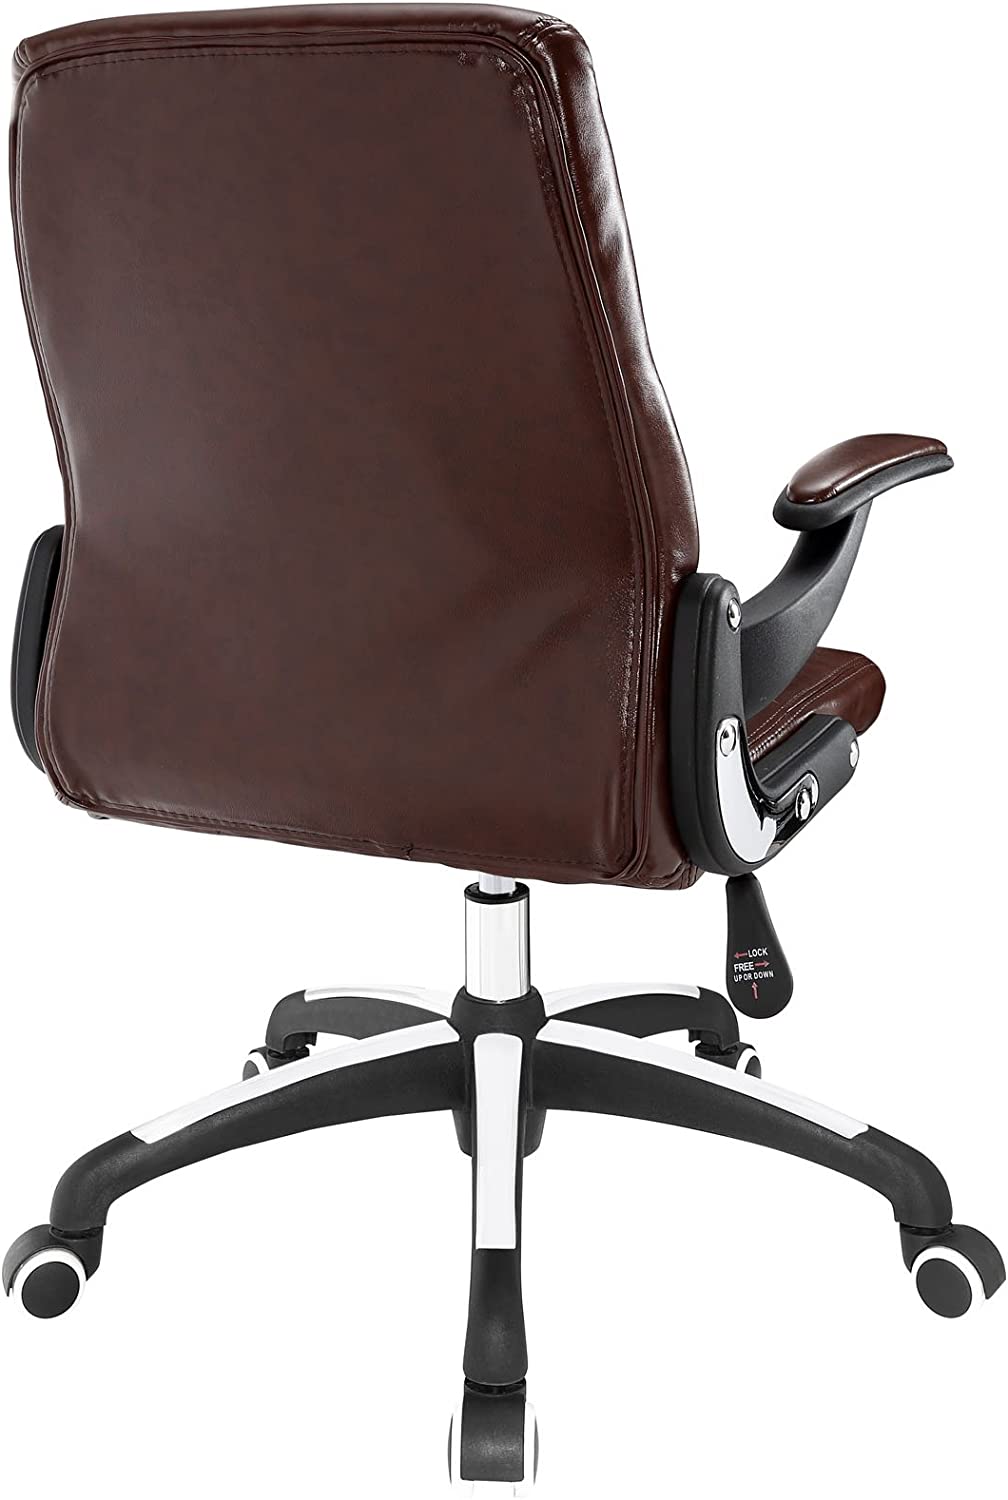 Modway Premier Highback Office Chair in Brown